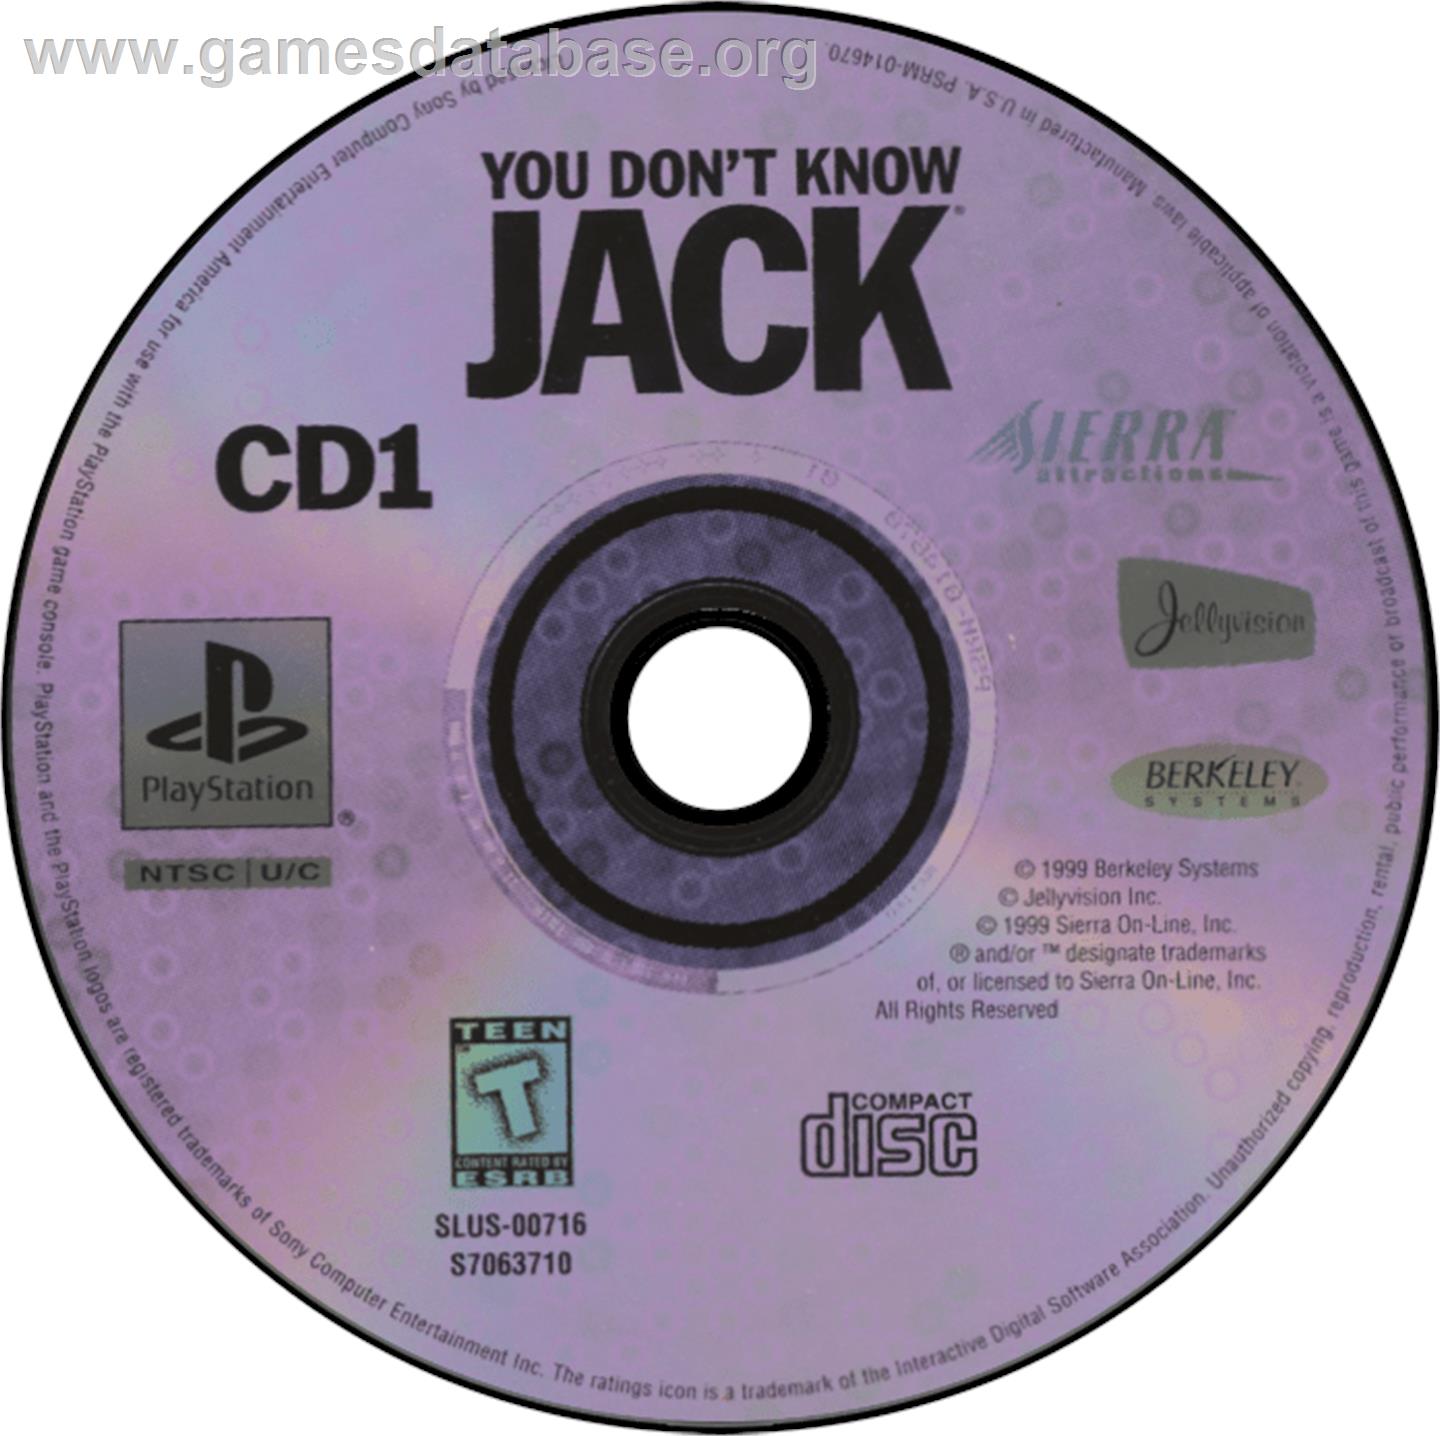 You Don't Know Jack - Sony Playstation - Artwork - Disc